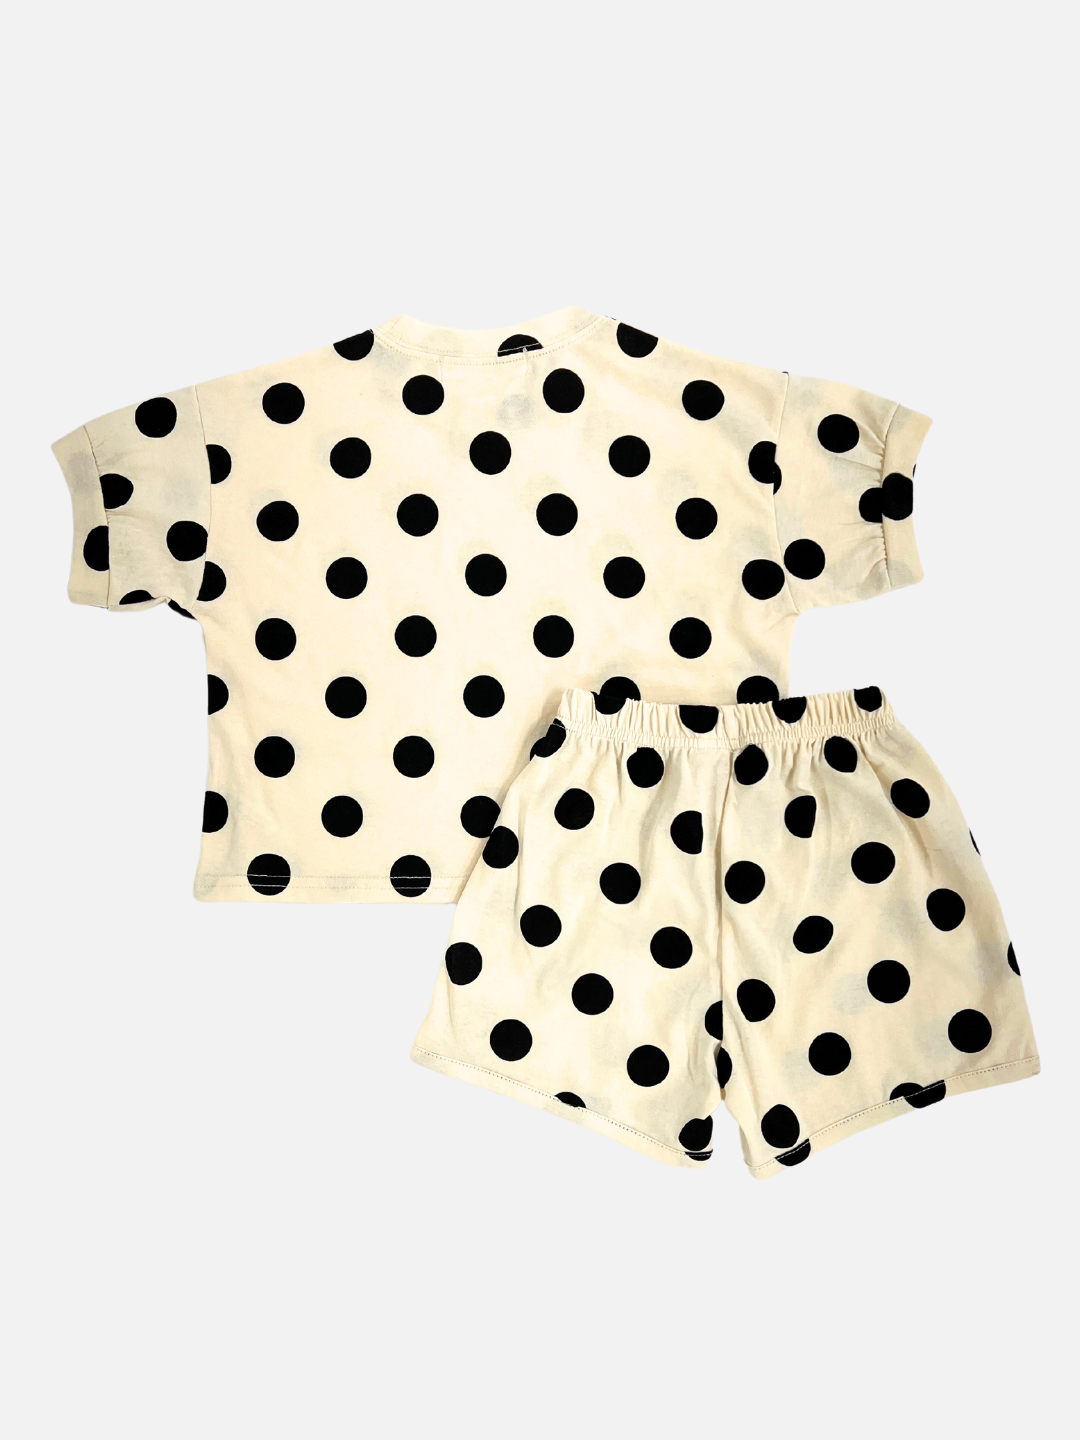 A kids' tee shirt and shorts set in a pattern of white dots on an ecru background, back view